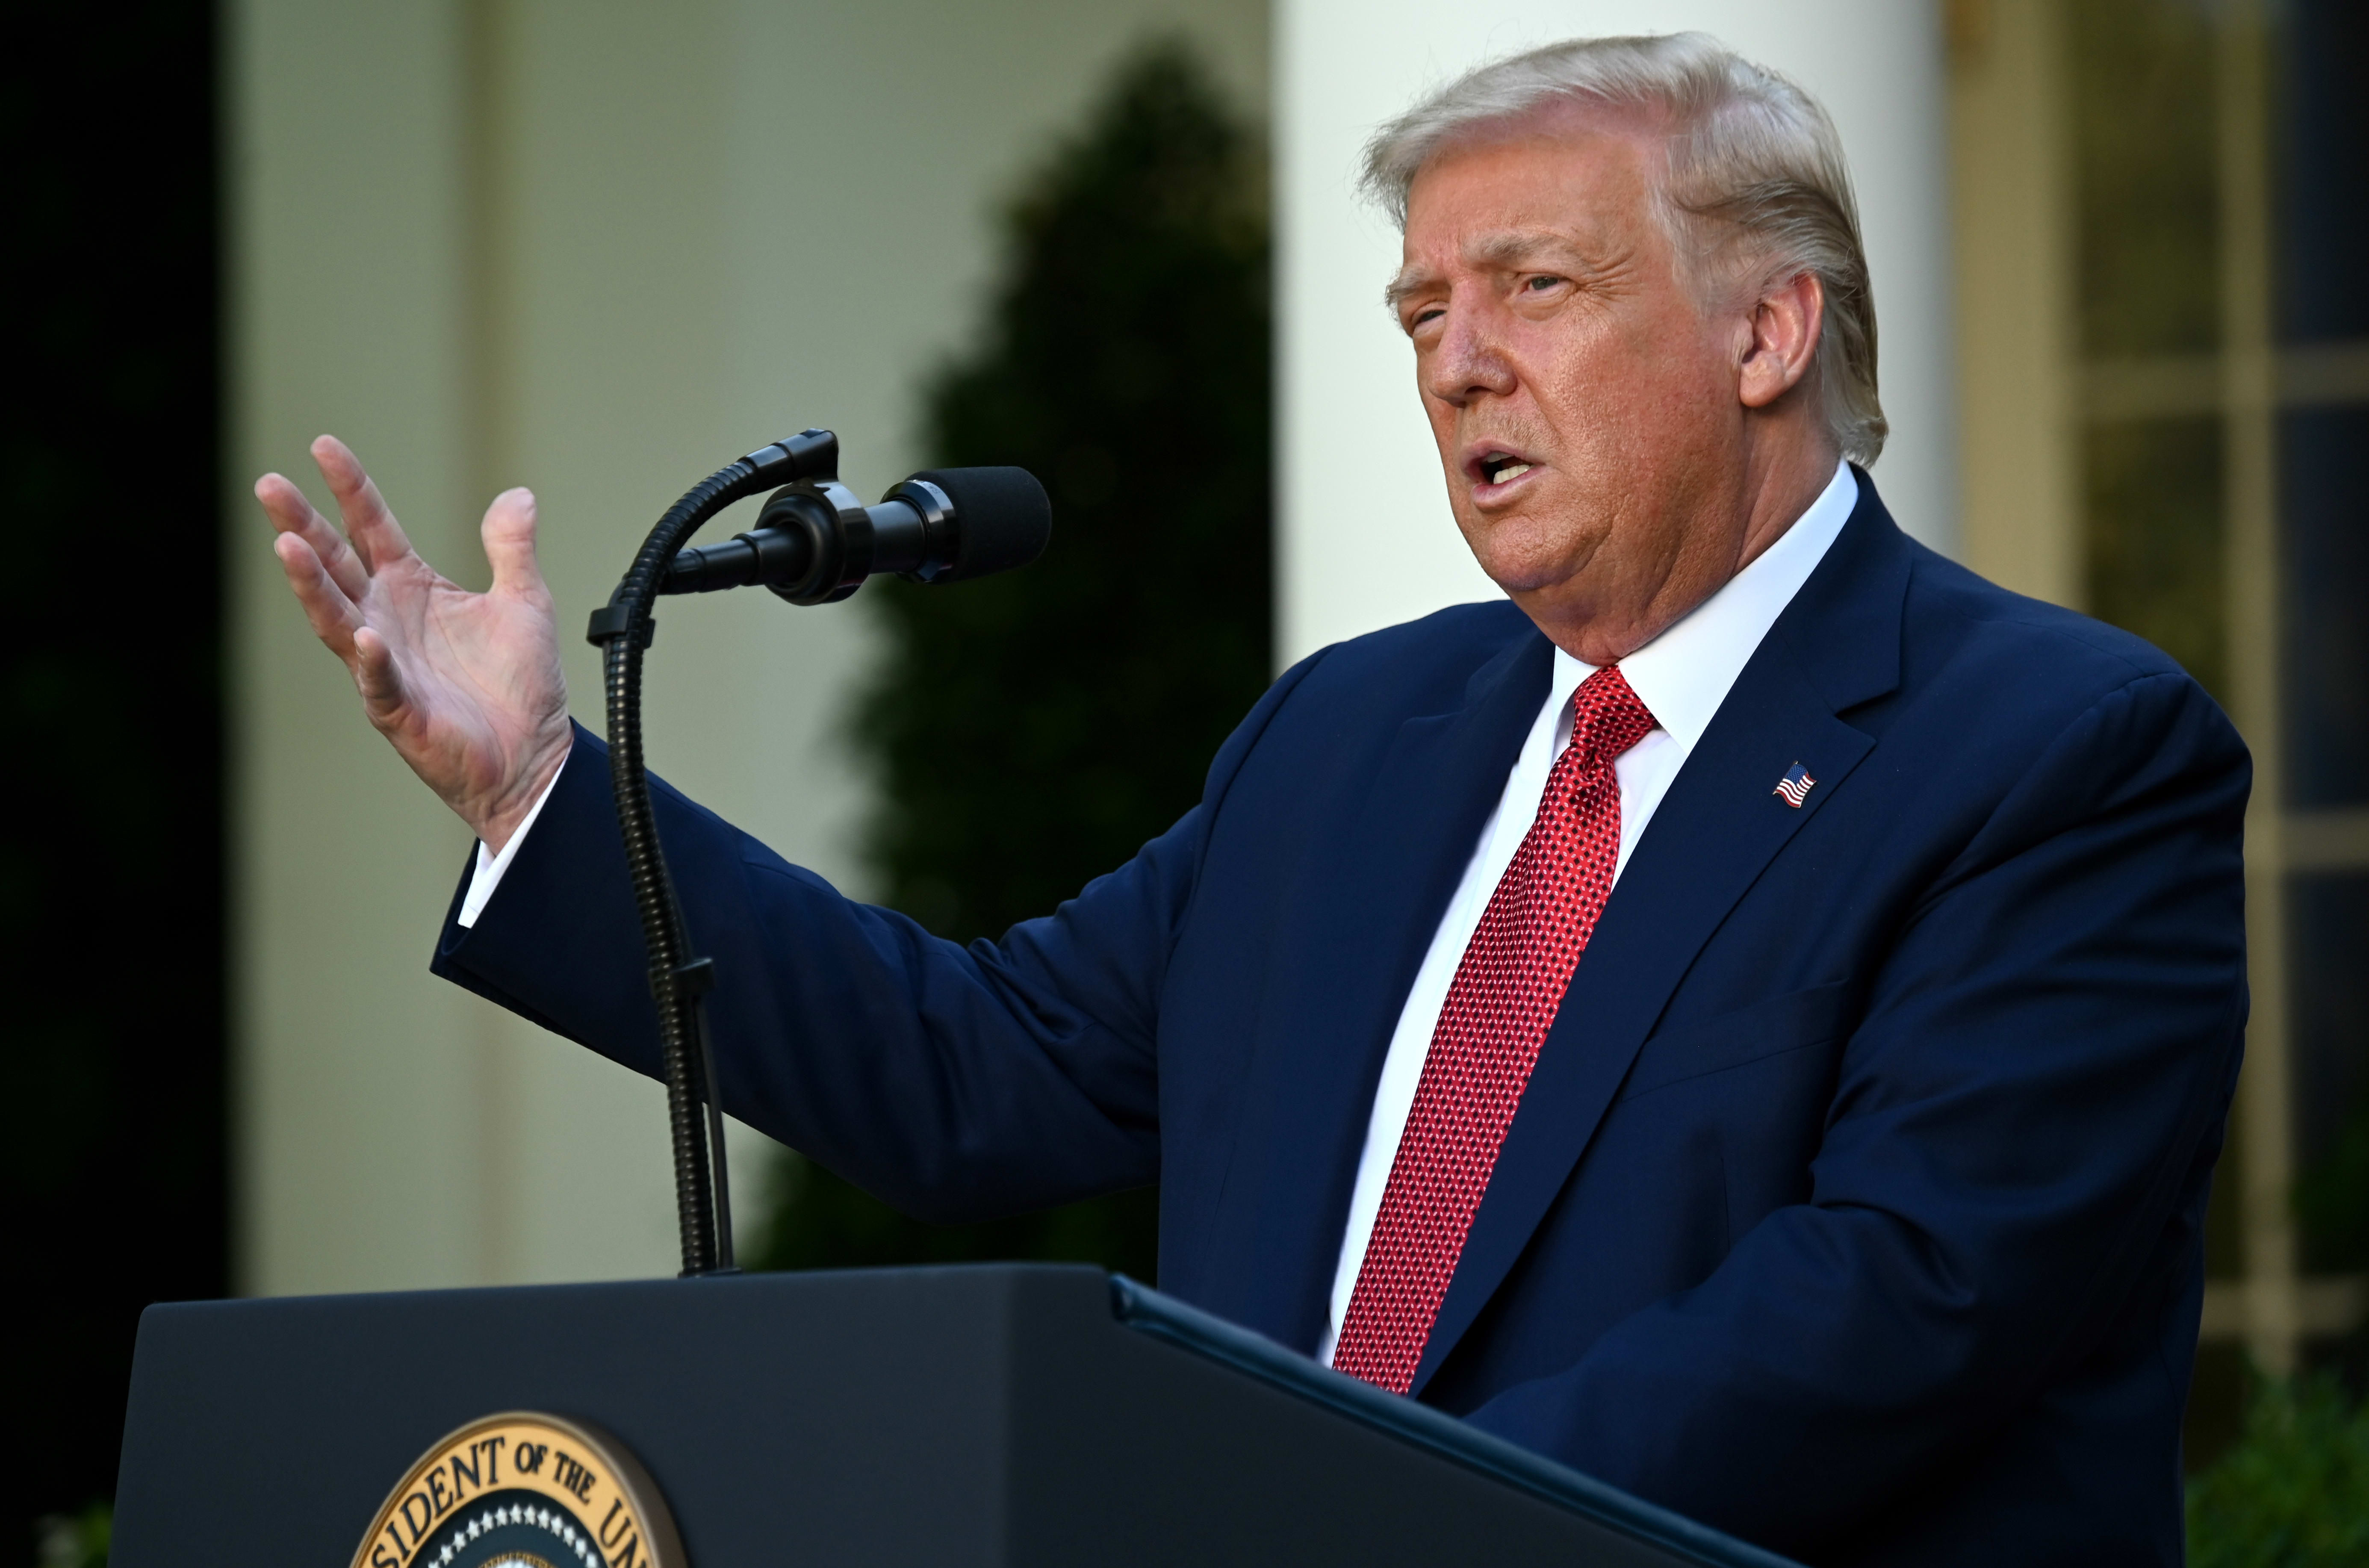 US President Donald Trump delivers a press conference in the Rose Garden of the White House in Washington, DC, on July 14, 2020.